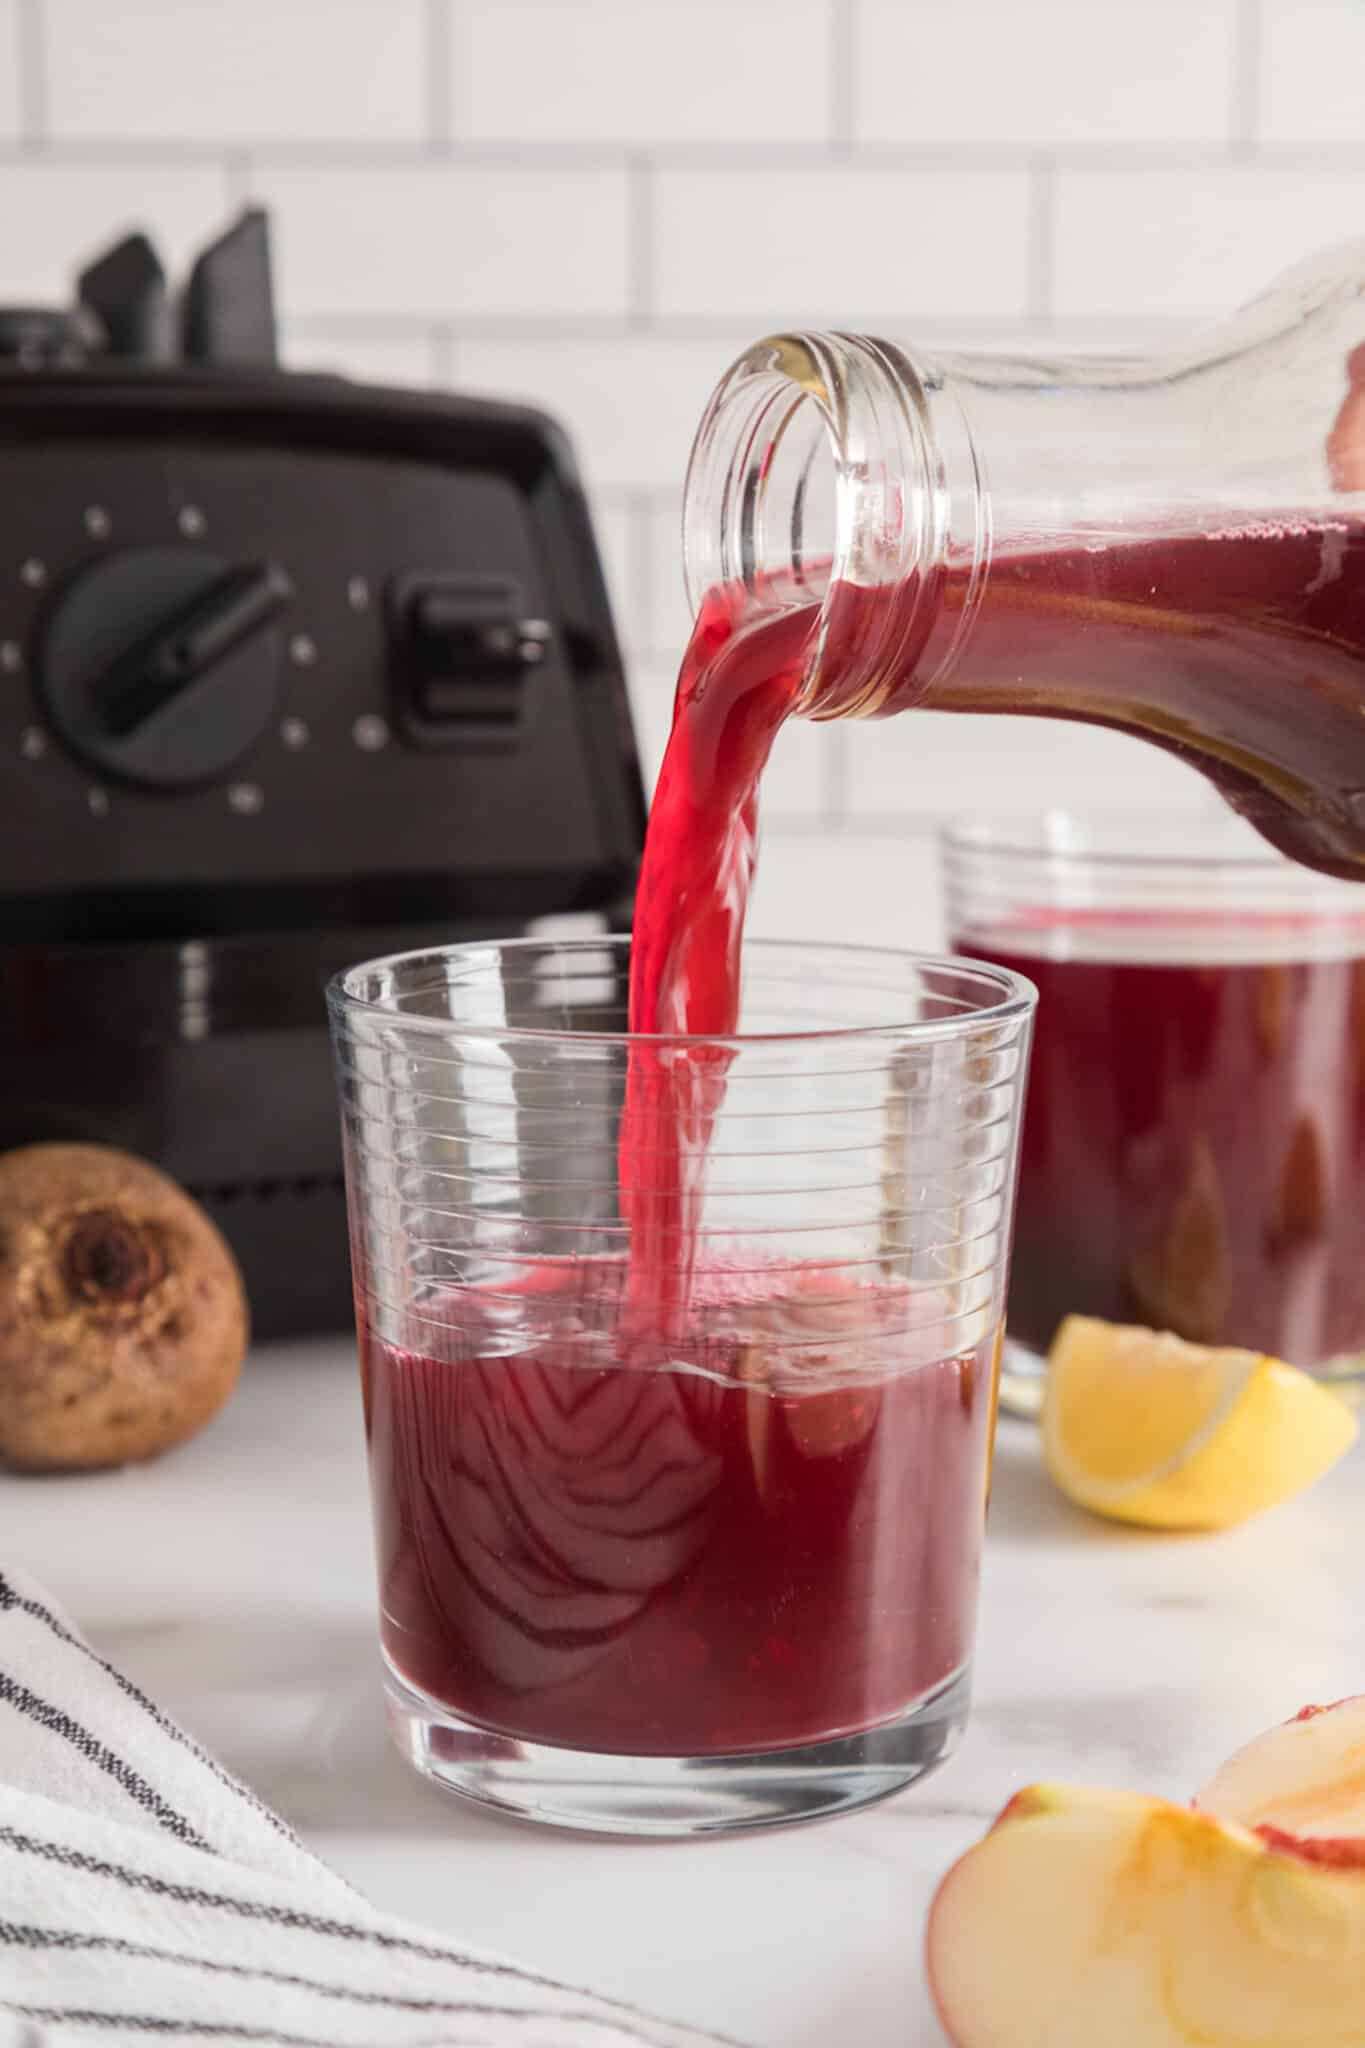 Pouring beet liver cleanse juice into a short glass.